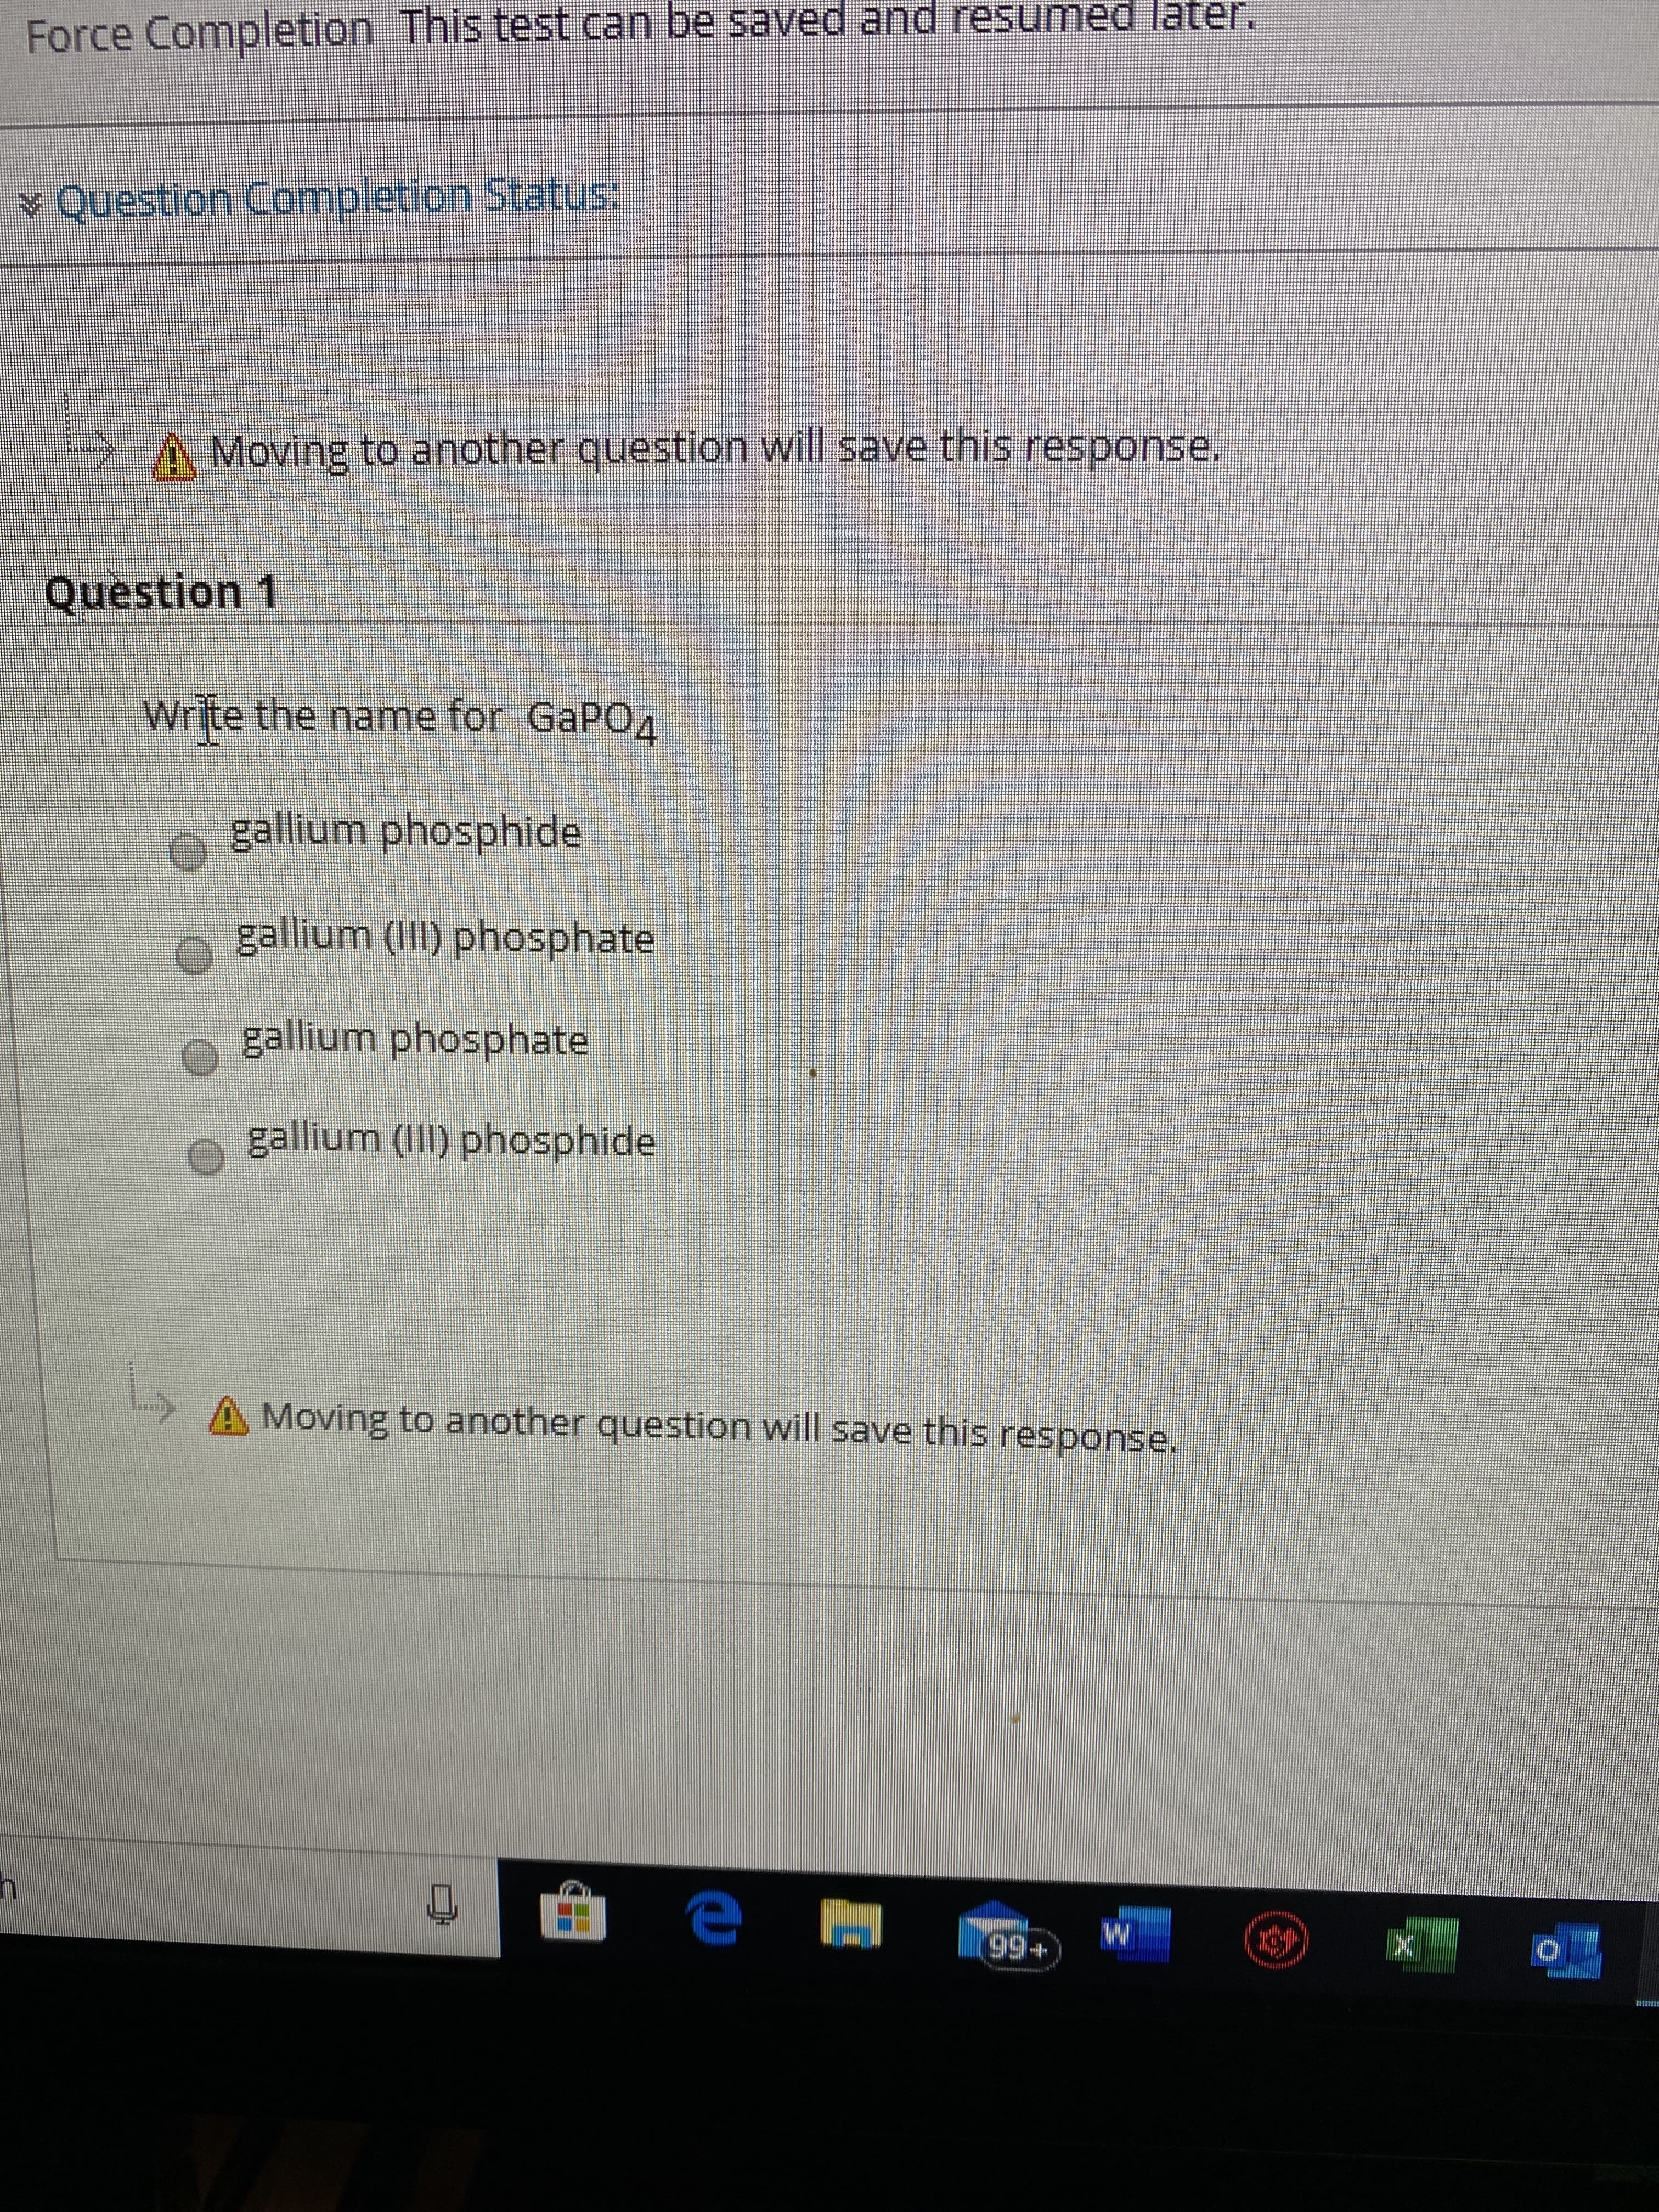 Force Completion This test can be saved and resumed later.
v Question Completion Status:
>A Moving to another question will save this response.
Question 1
Write the name for GaPO4
gallium phosphide
gallium (II) phosphate
gallium phosphate
gallium (III) phosphide
A Moving to another question will save this response.
